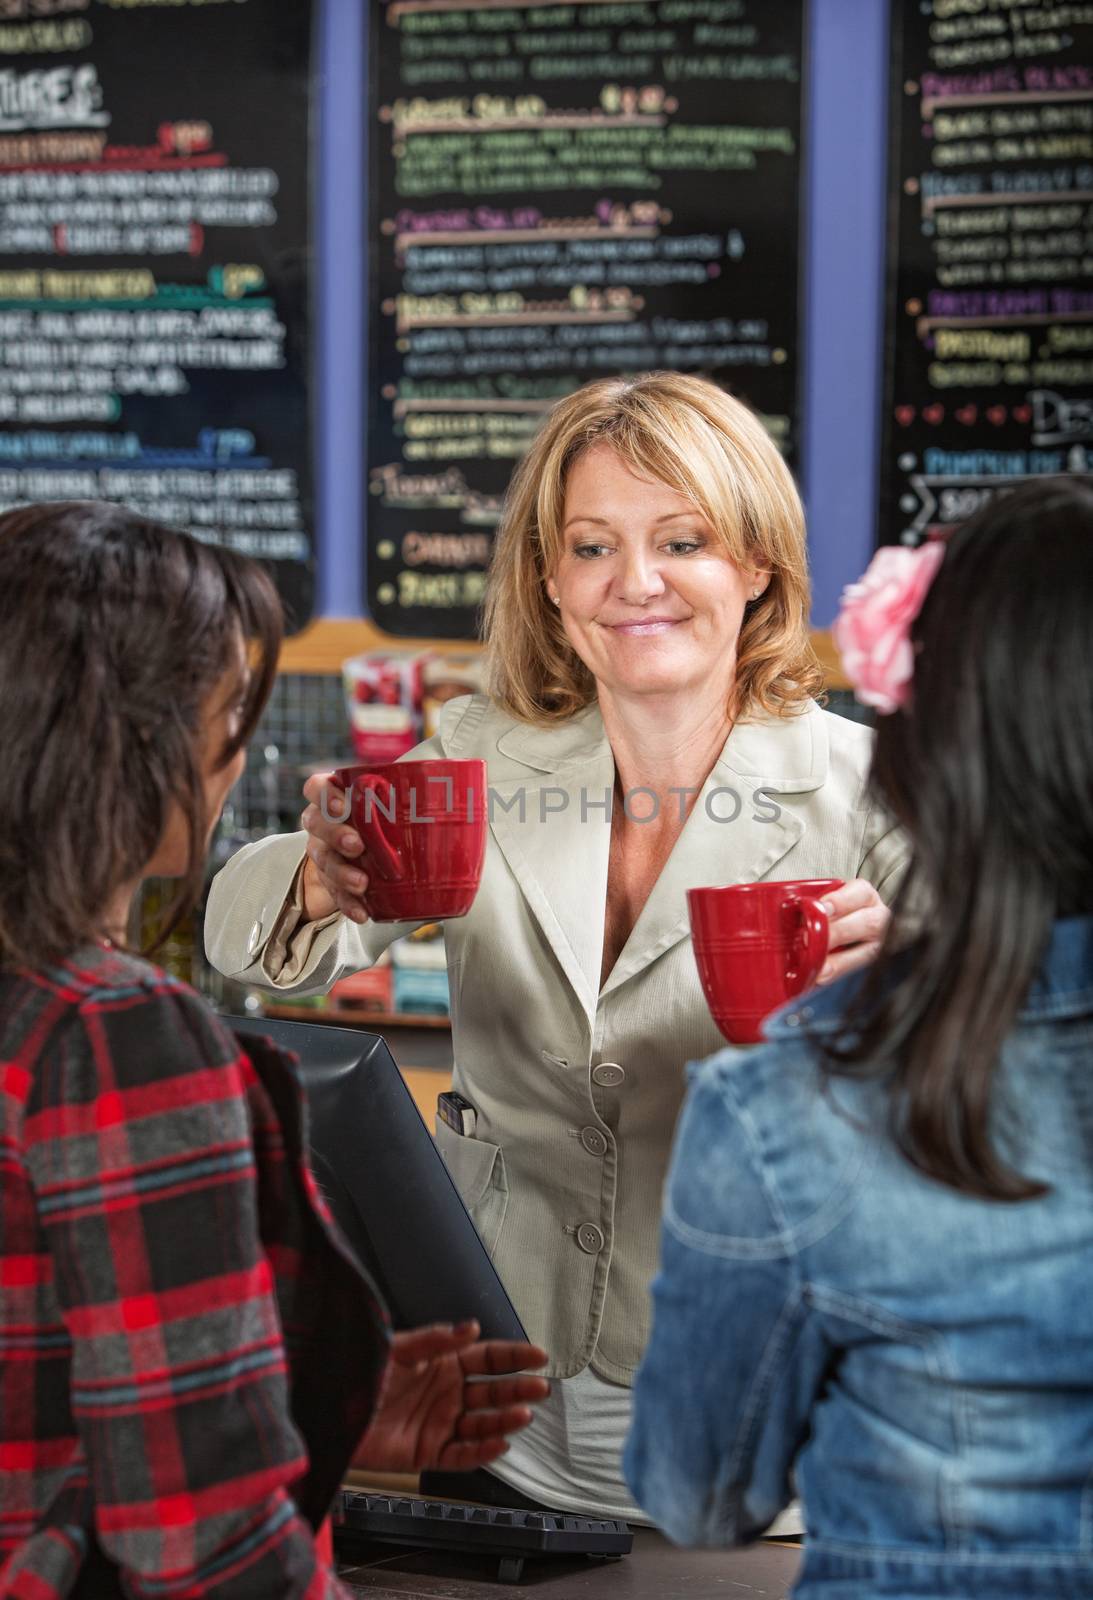 Smiling cafe owner serving drinks to customers